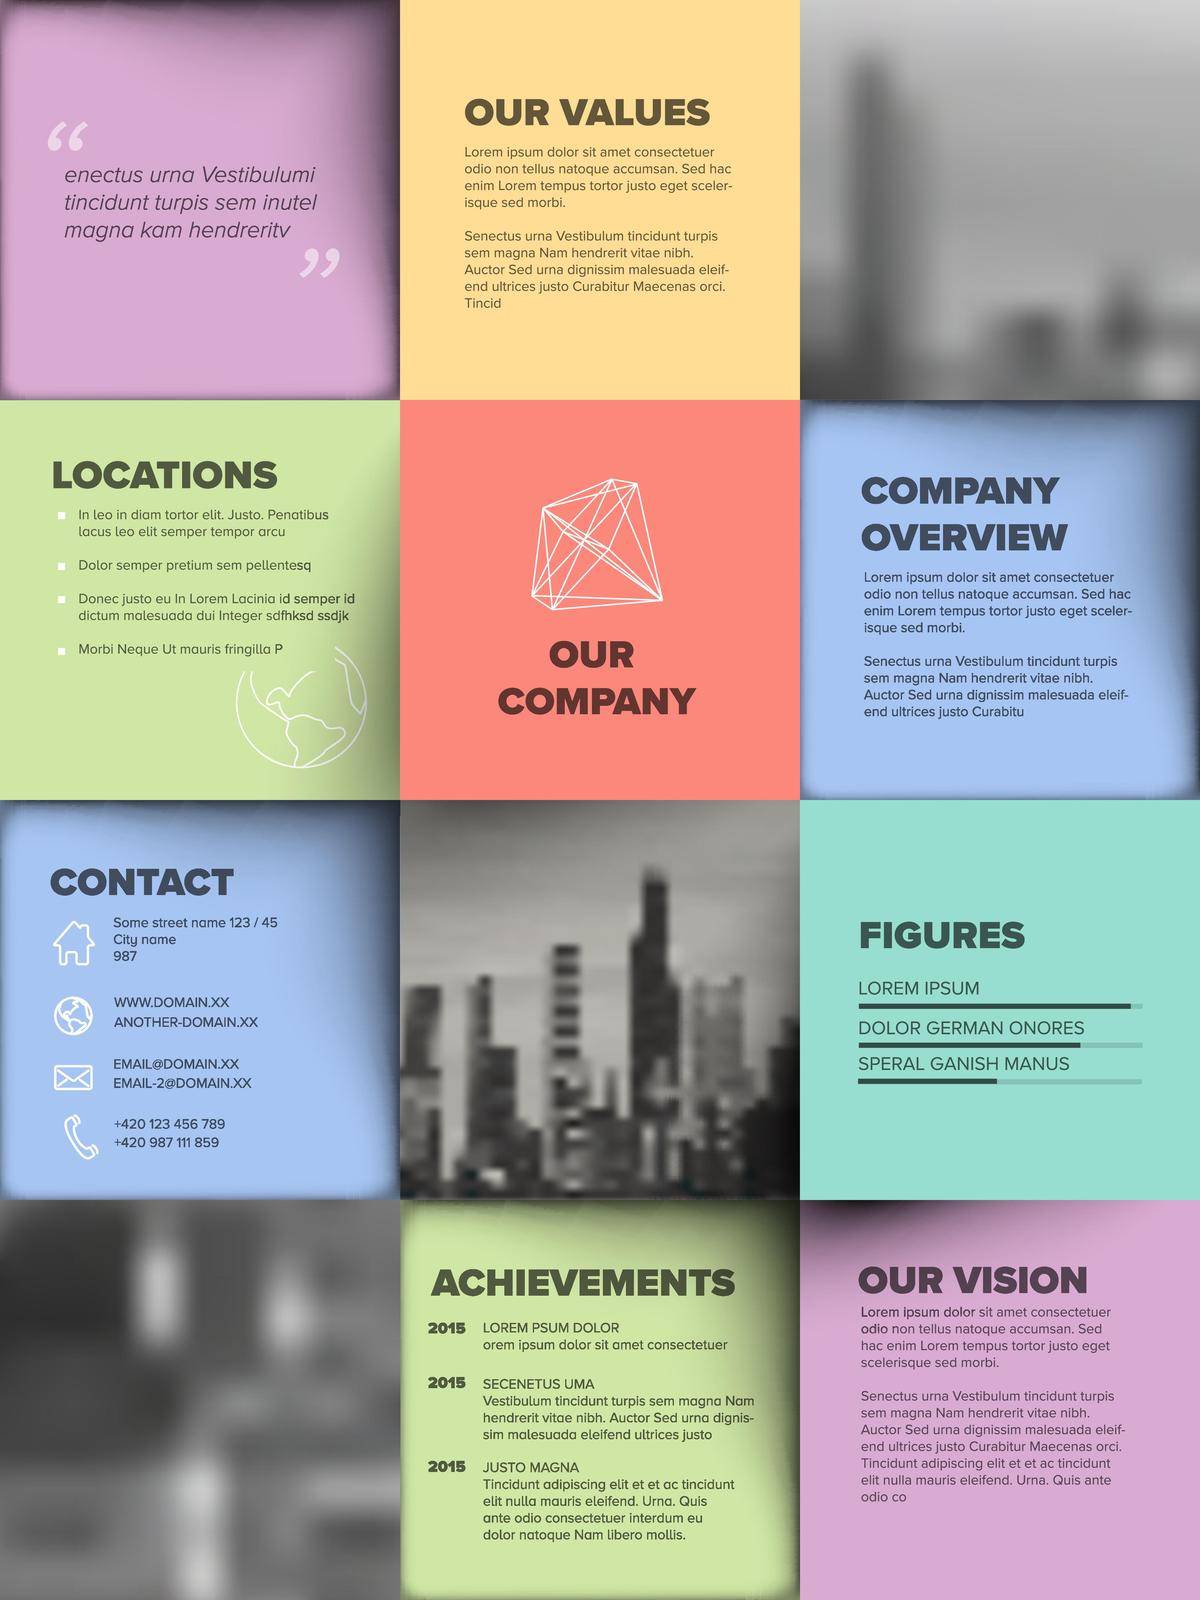 Company profile template - corporation main information presentation - pastel vertical version with black and white photo placeholders